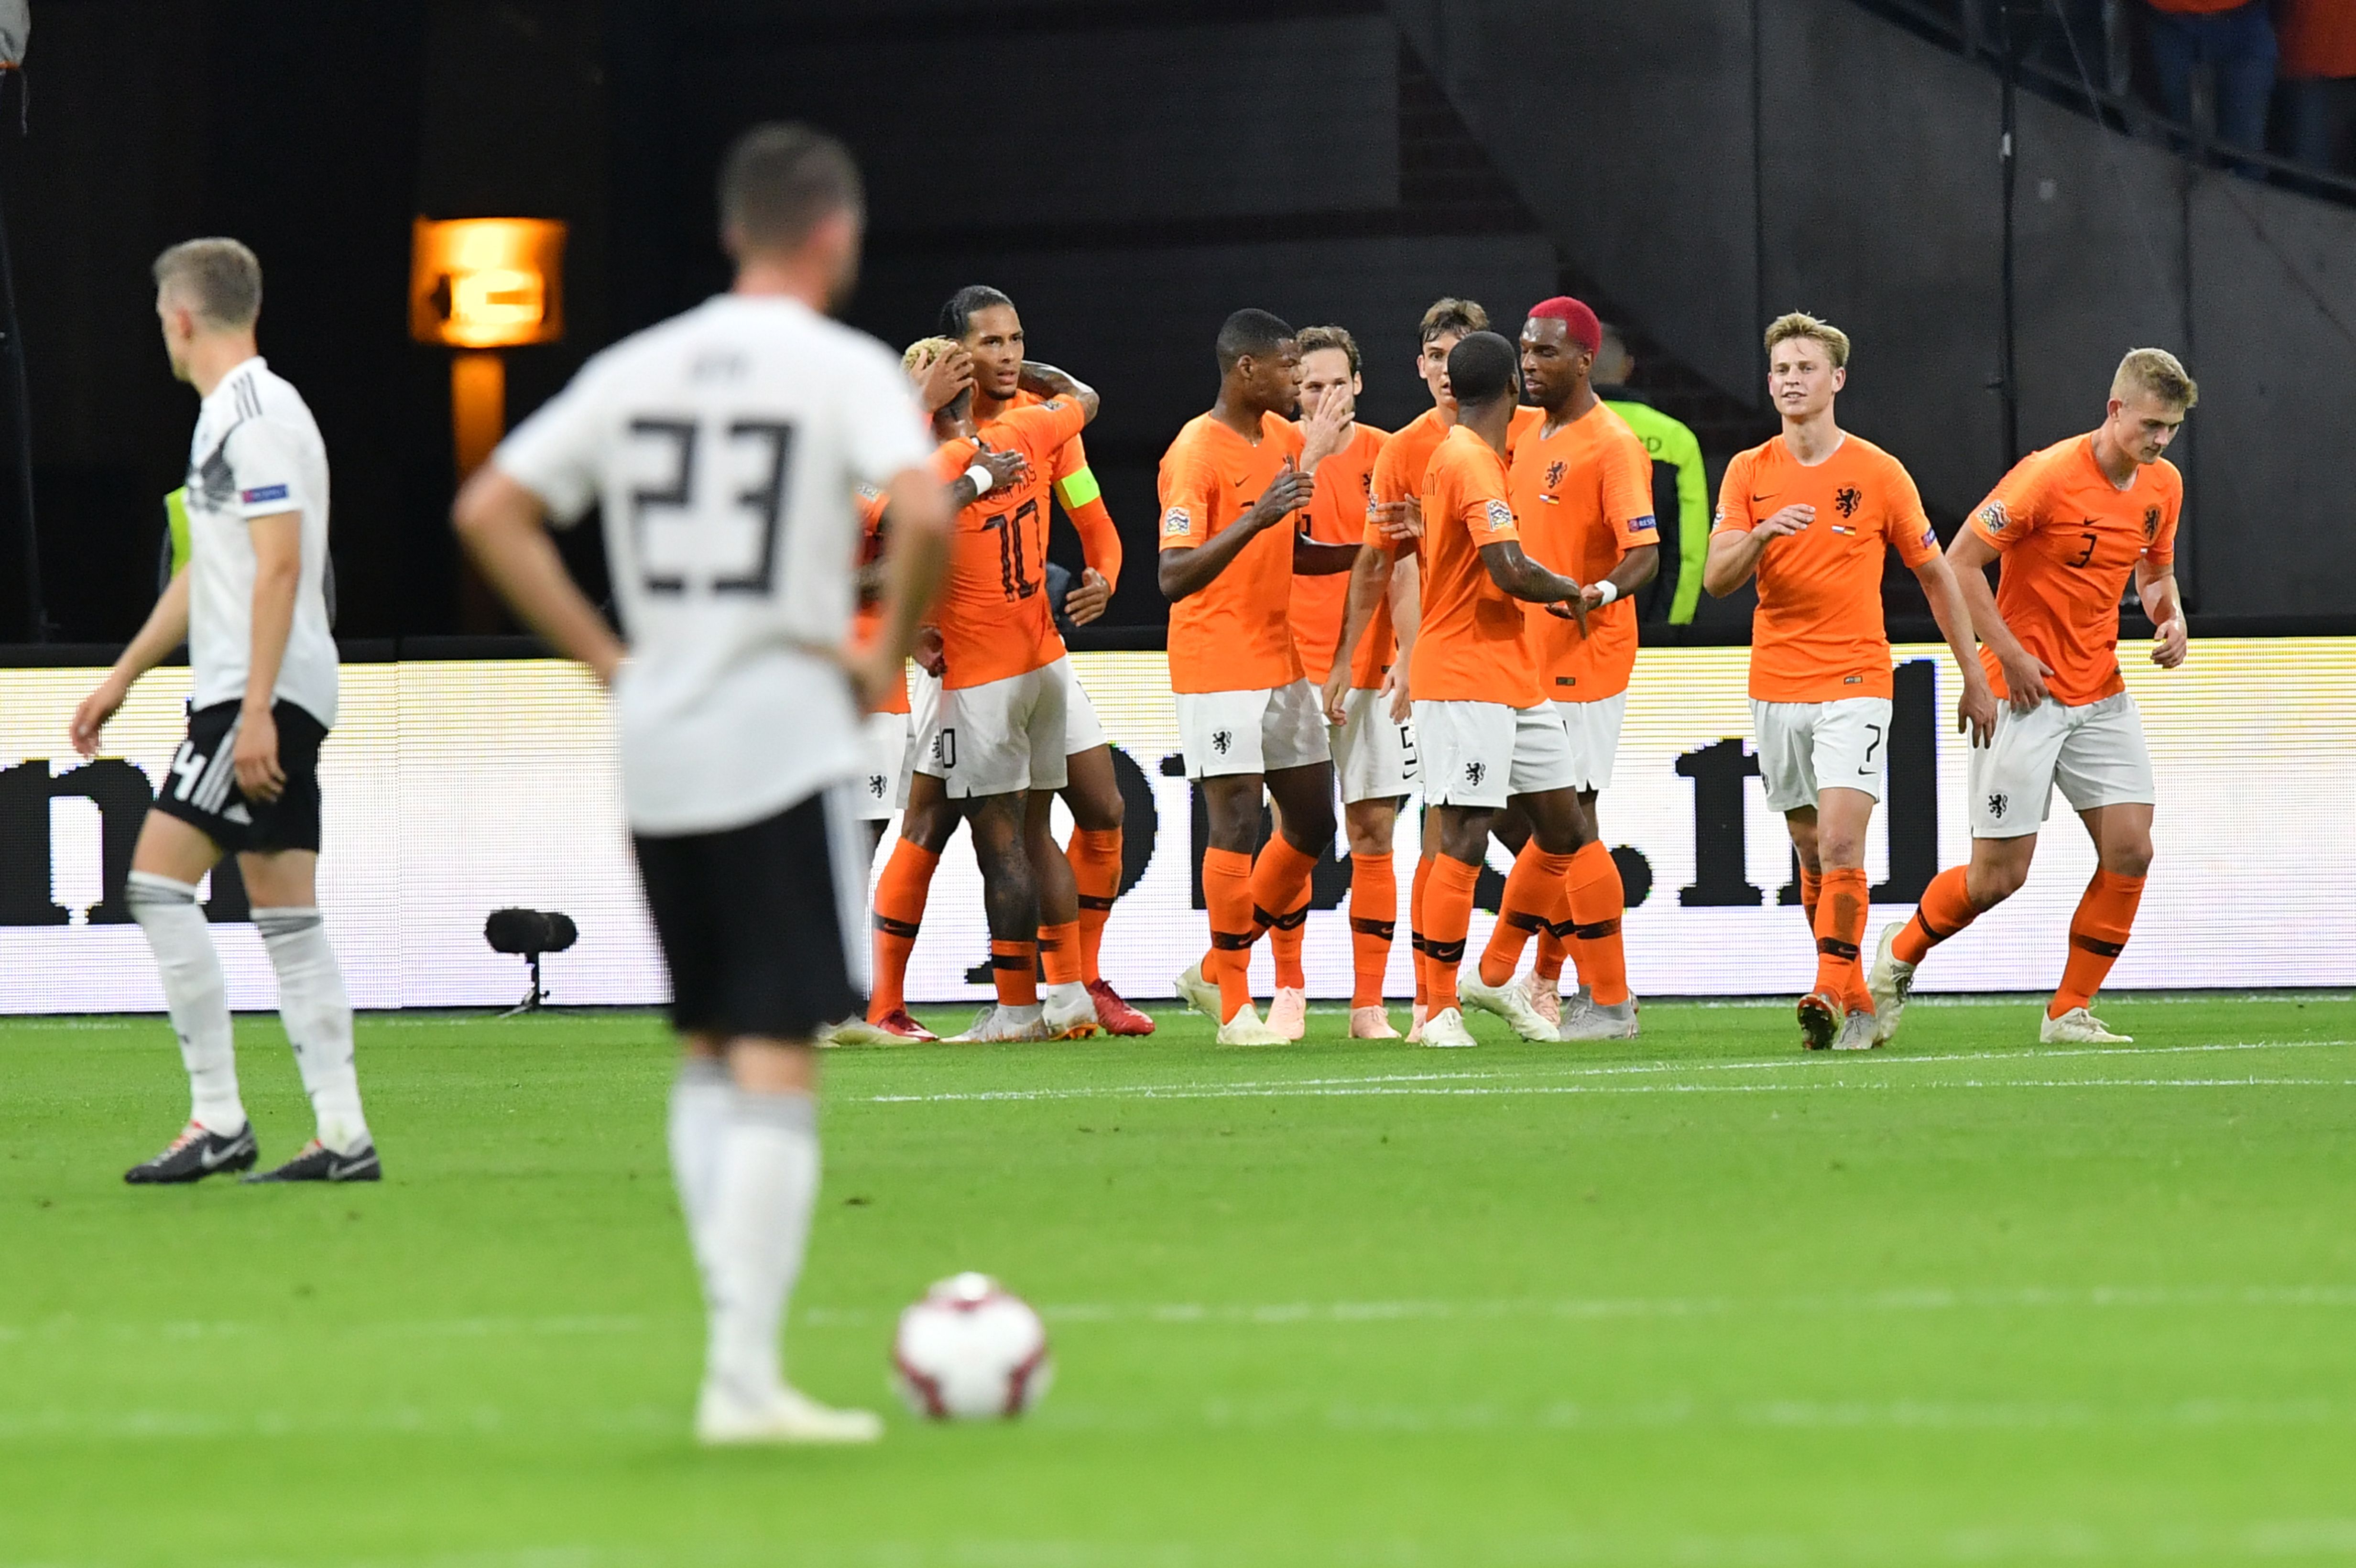 Netherlands' defender Virgil van Dijk (4thL) celebrates with teammates after scoring the opening goal during the UEFA Nations League football match between Netherlands and Germany, on October 13, 2018 at Johan Crujiff ArenA in Amsterdam. (Photo by EMMANUEL DUNAND / AFP)        (Photo credit should read EMMANUEL DUNAND/AFP/Getty Images)